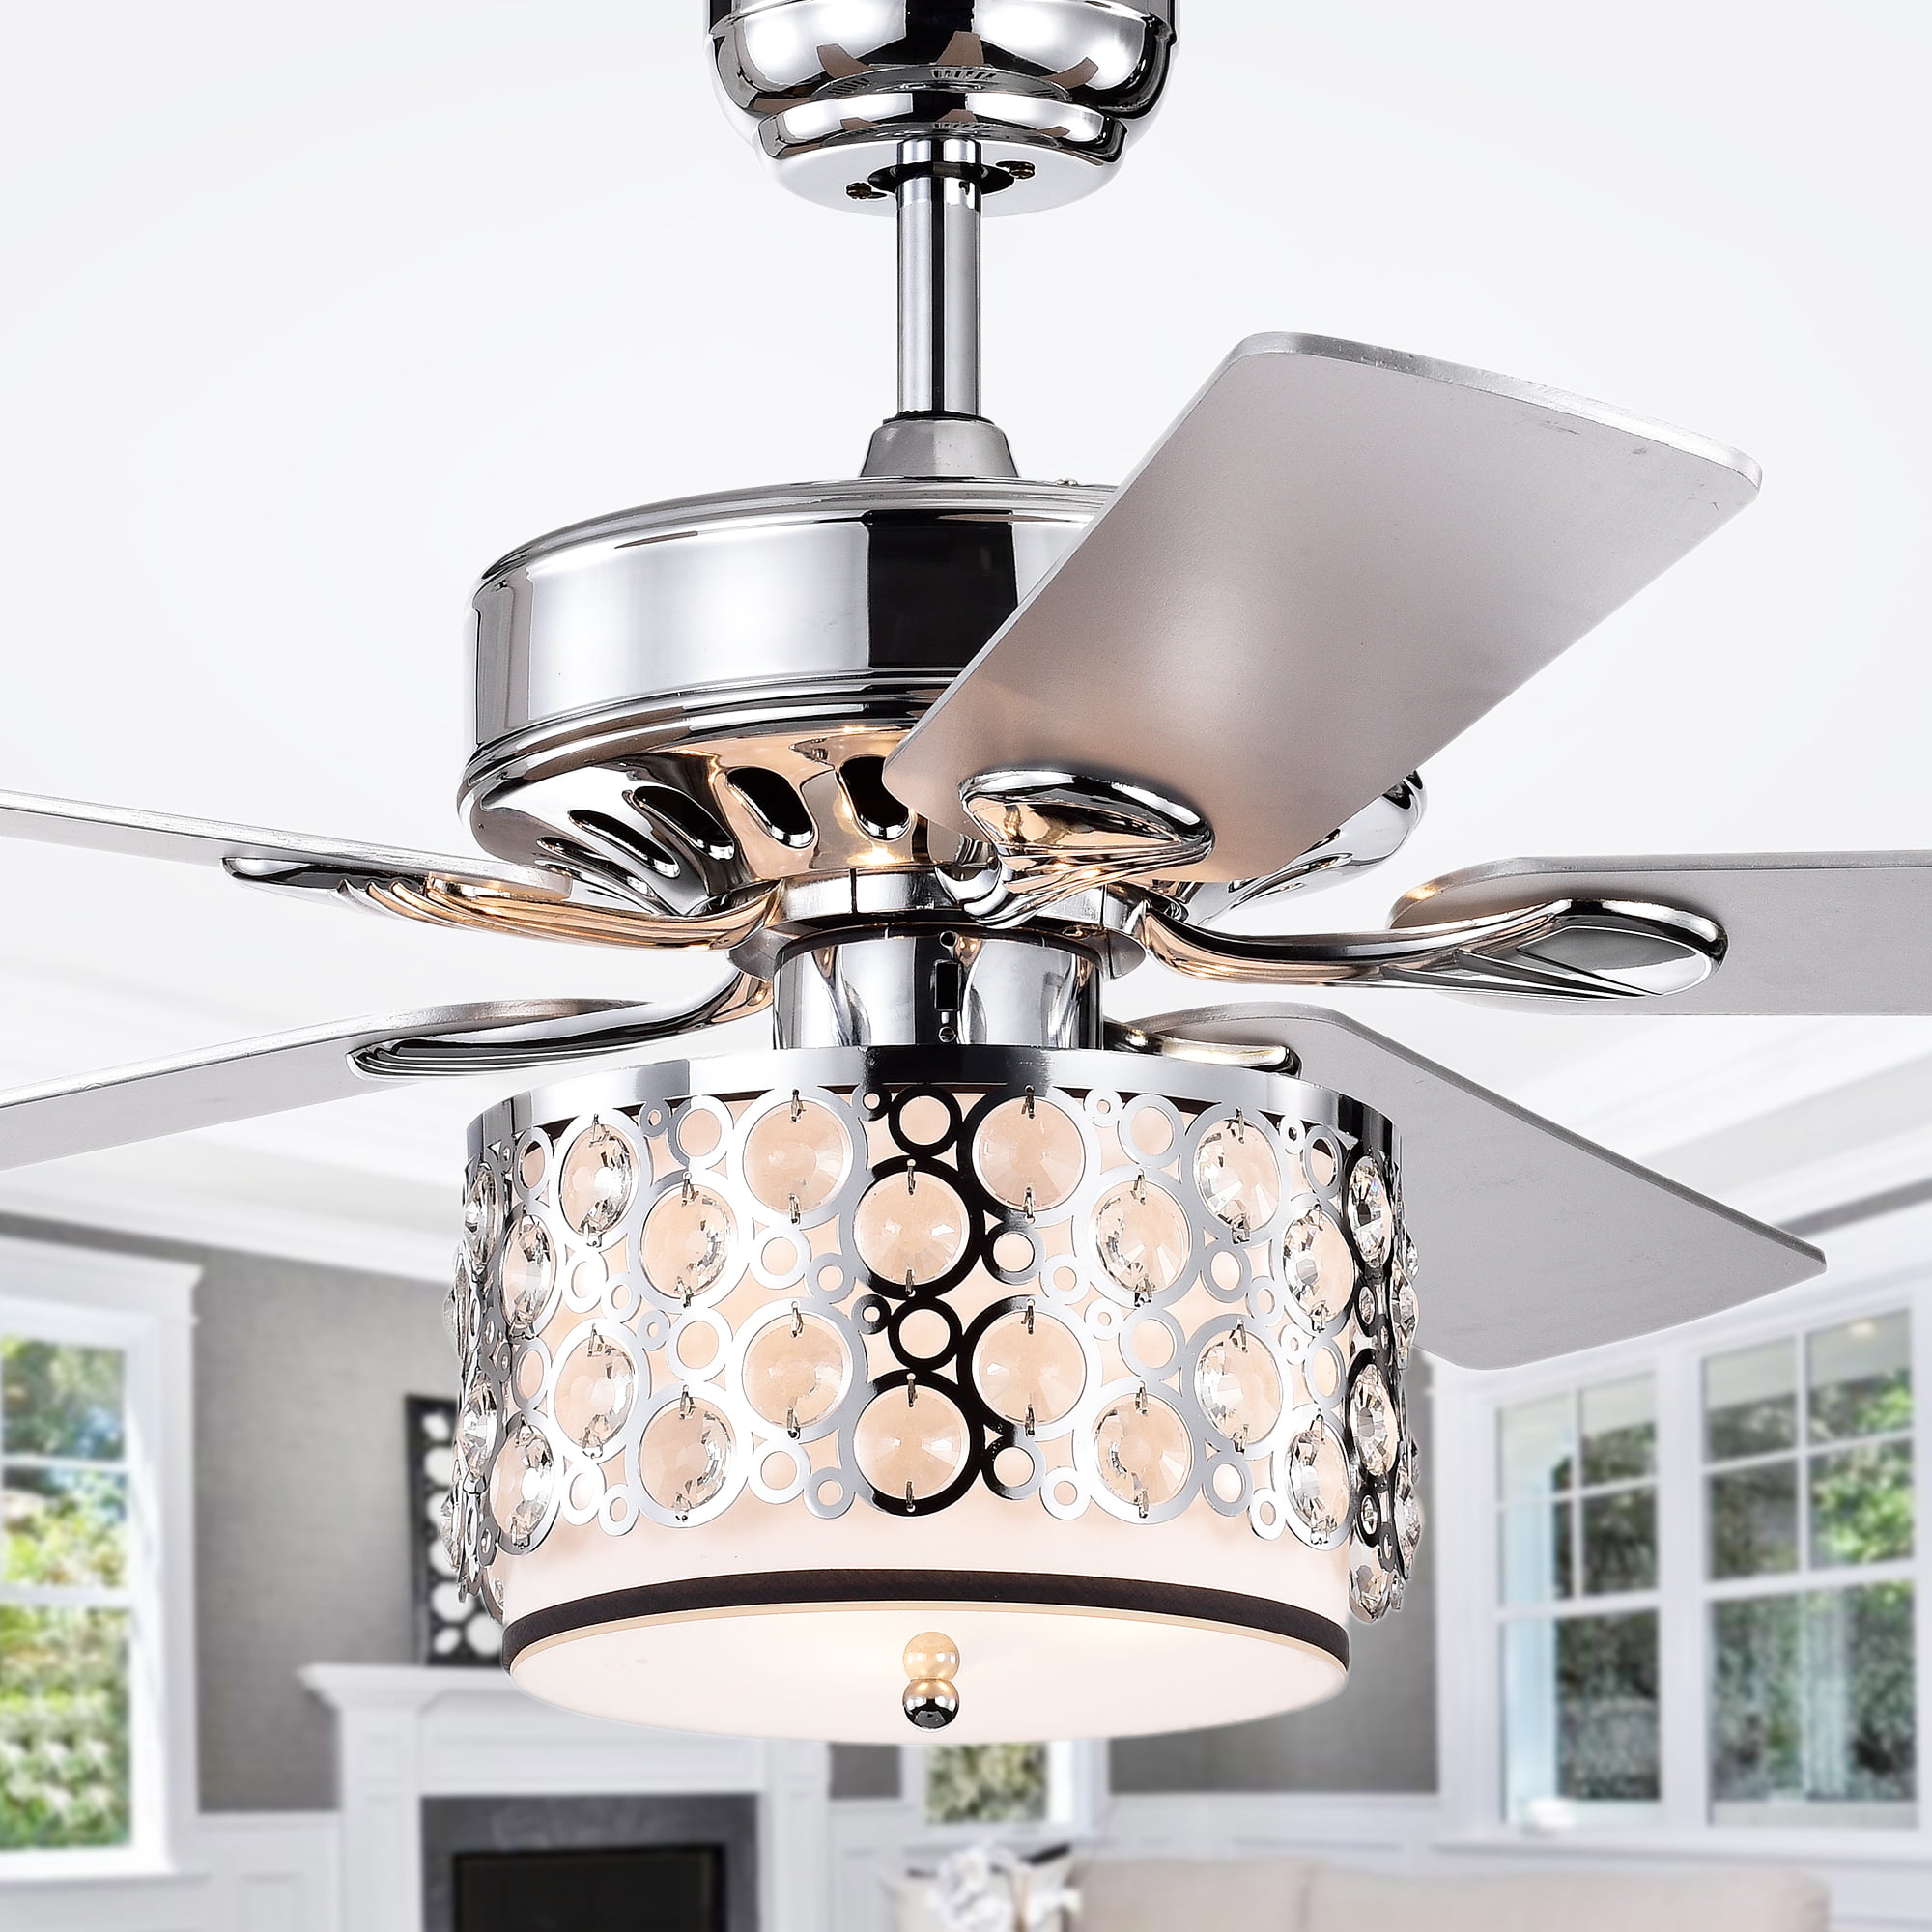 Maree Chrome 52-Inch 5-Blade Lighted Ceiling Fan Includes Remote